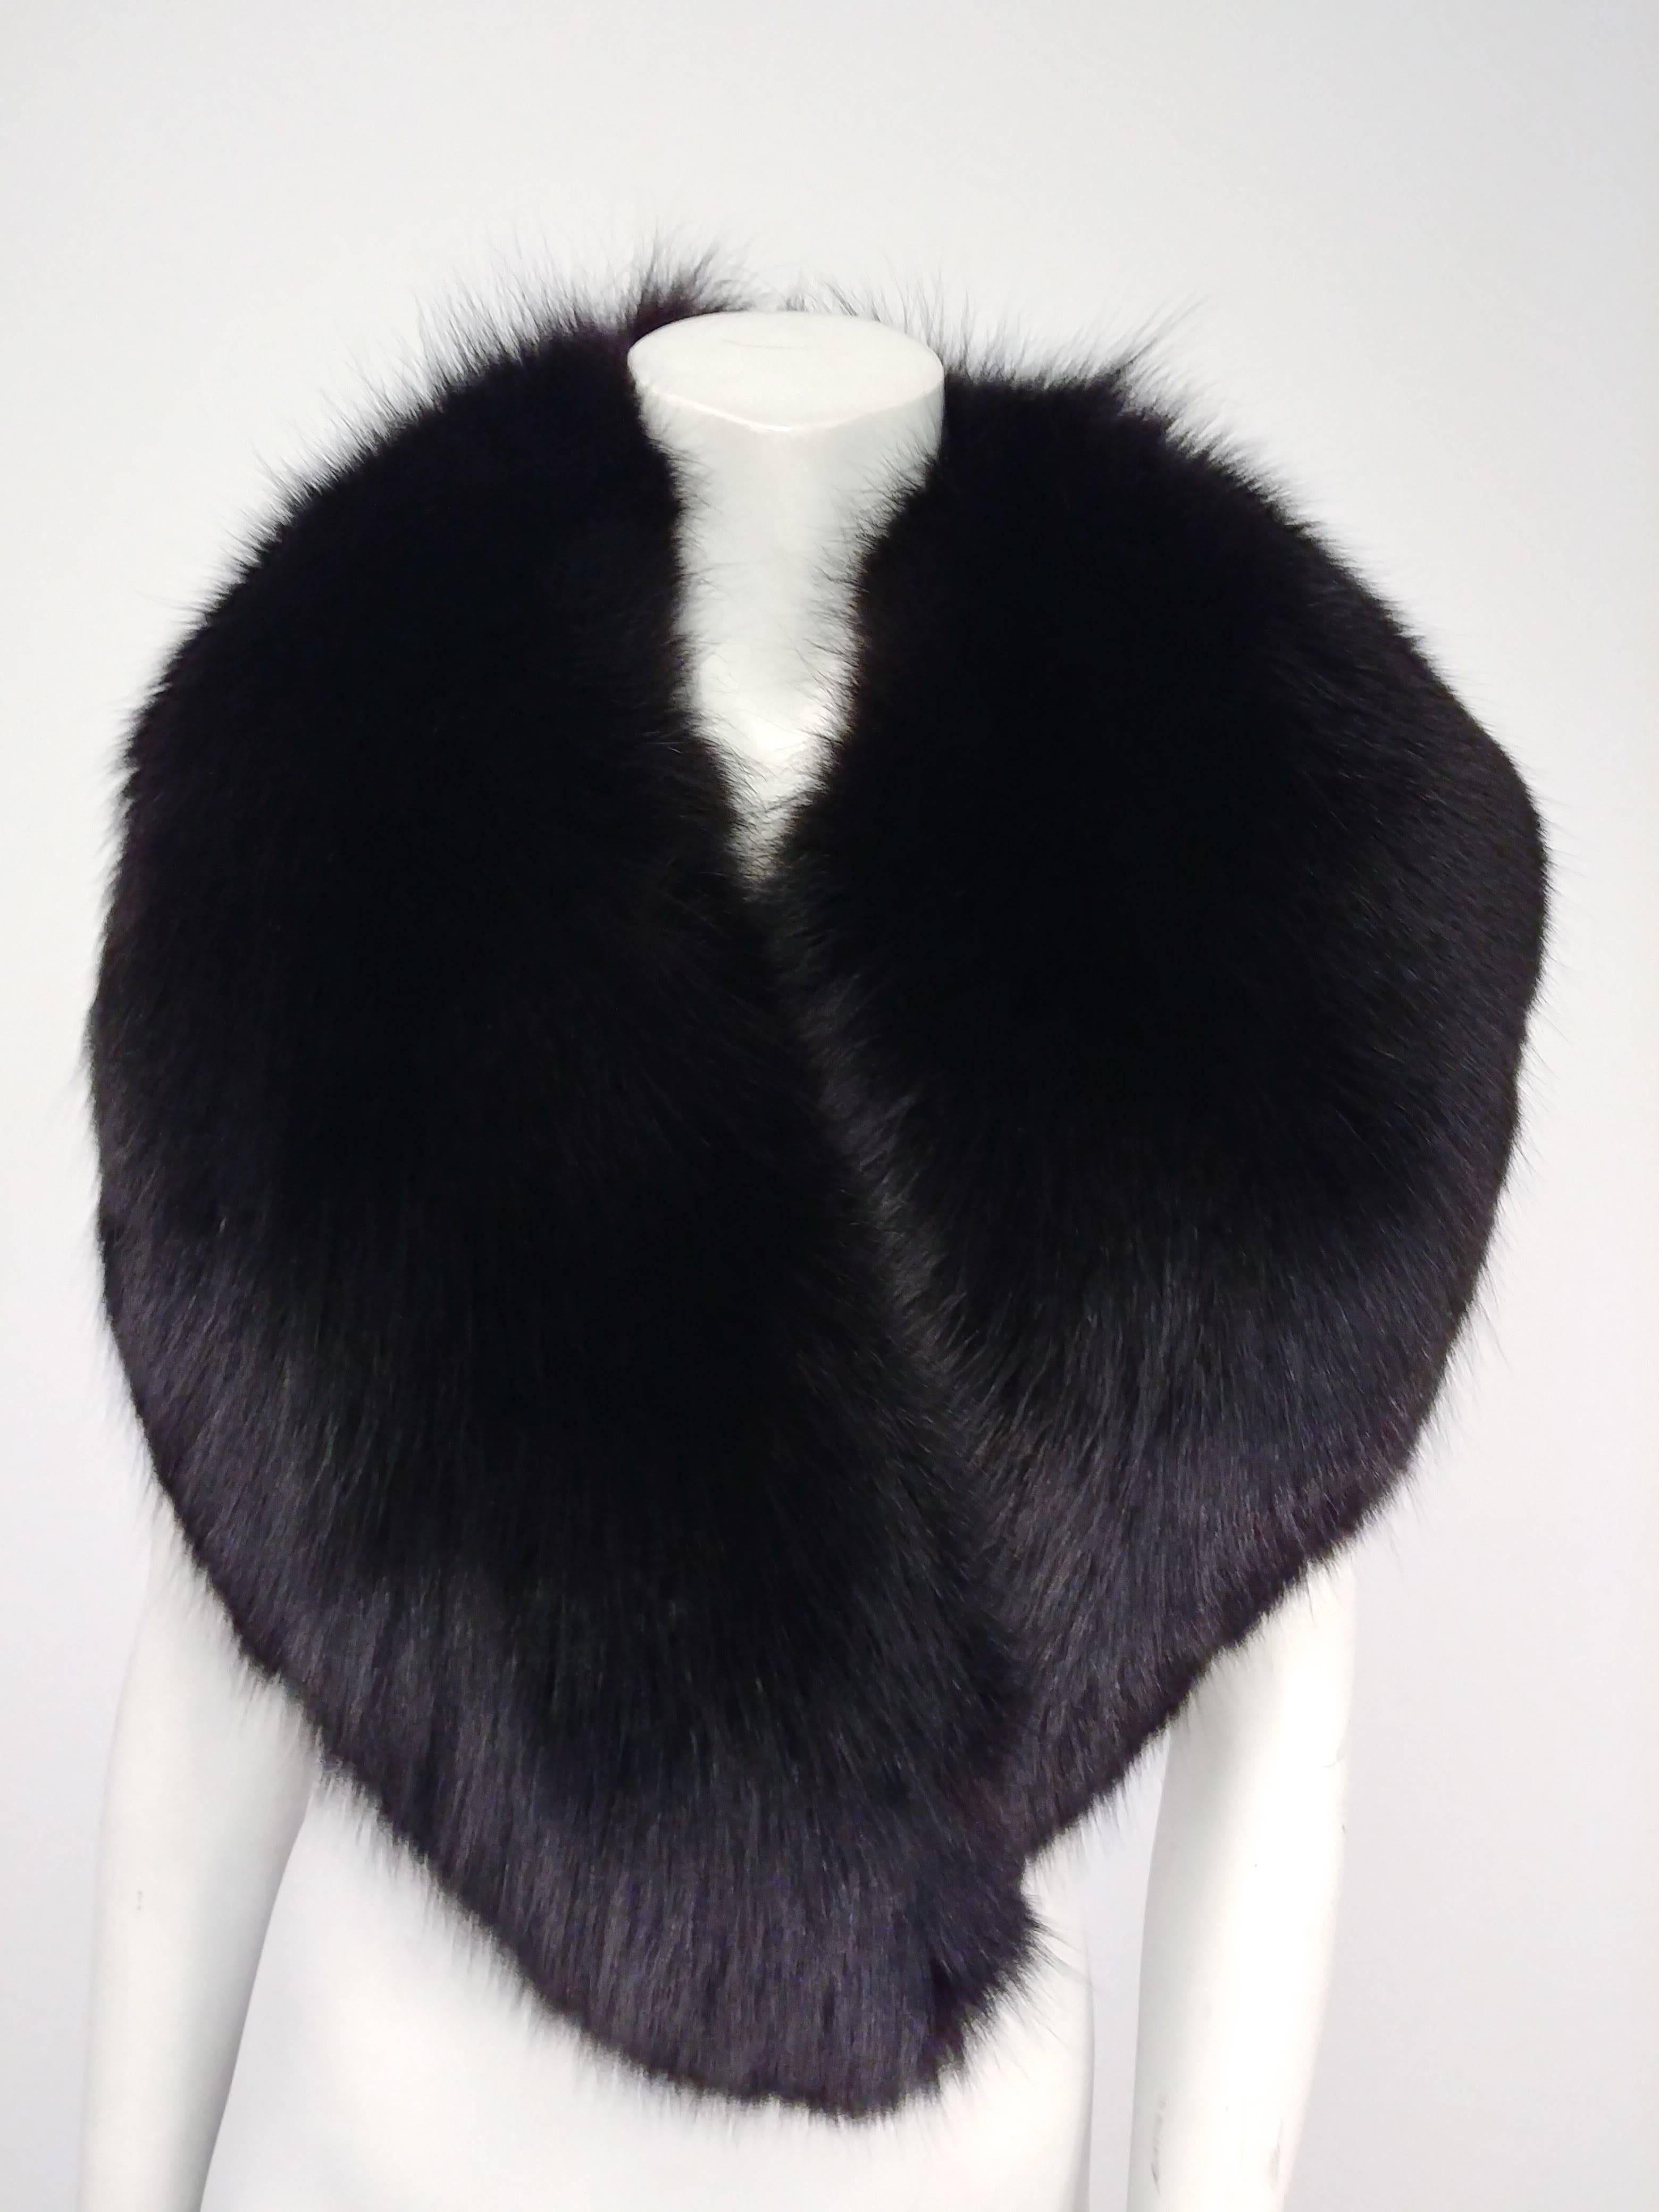 Pure Black Fox Fur Stole. Luxurious thick black fox fur, can be worn in a number of ways. Perfect to keep warm and look elegant!